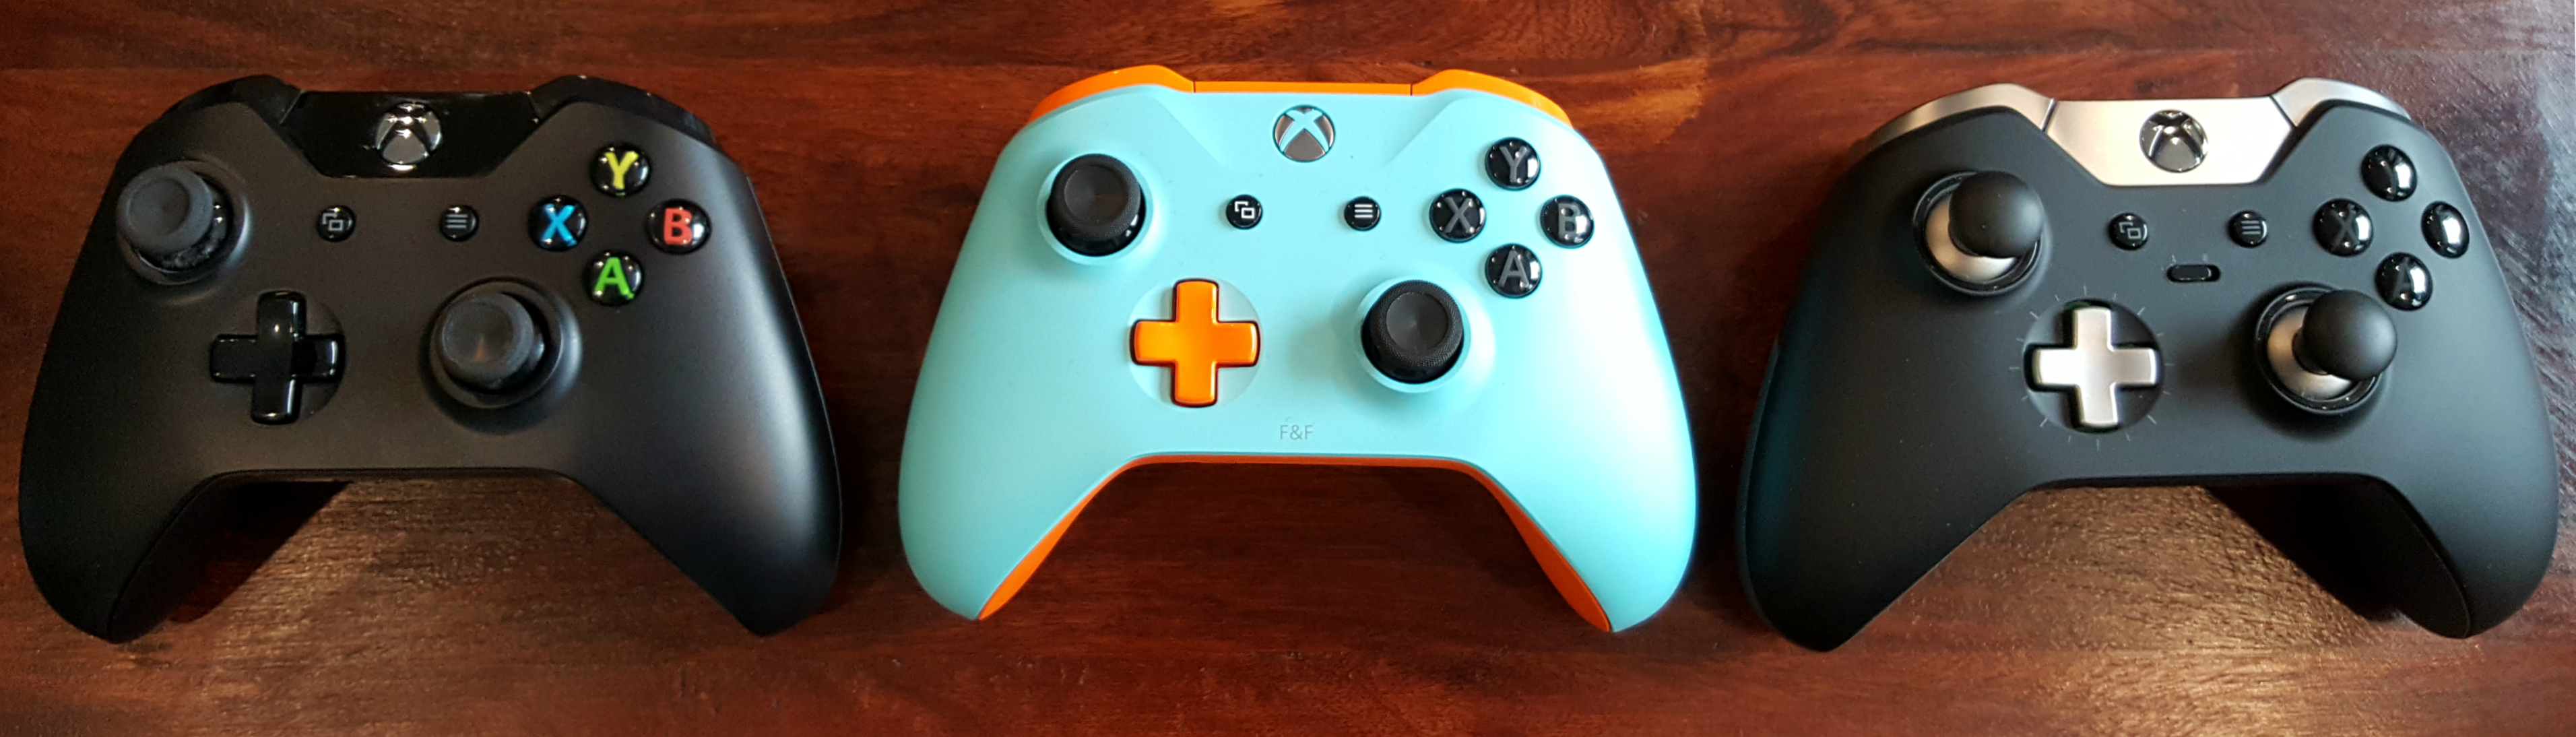 xbox one s controller model